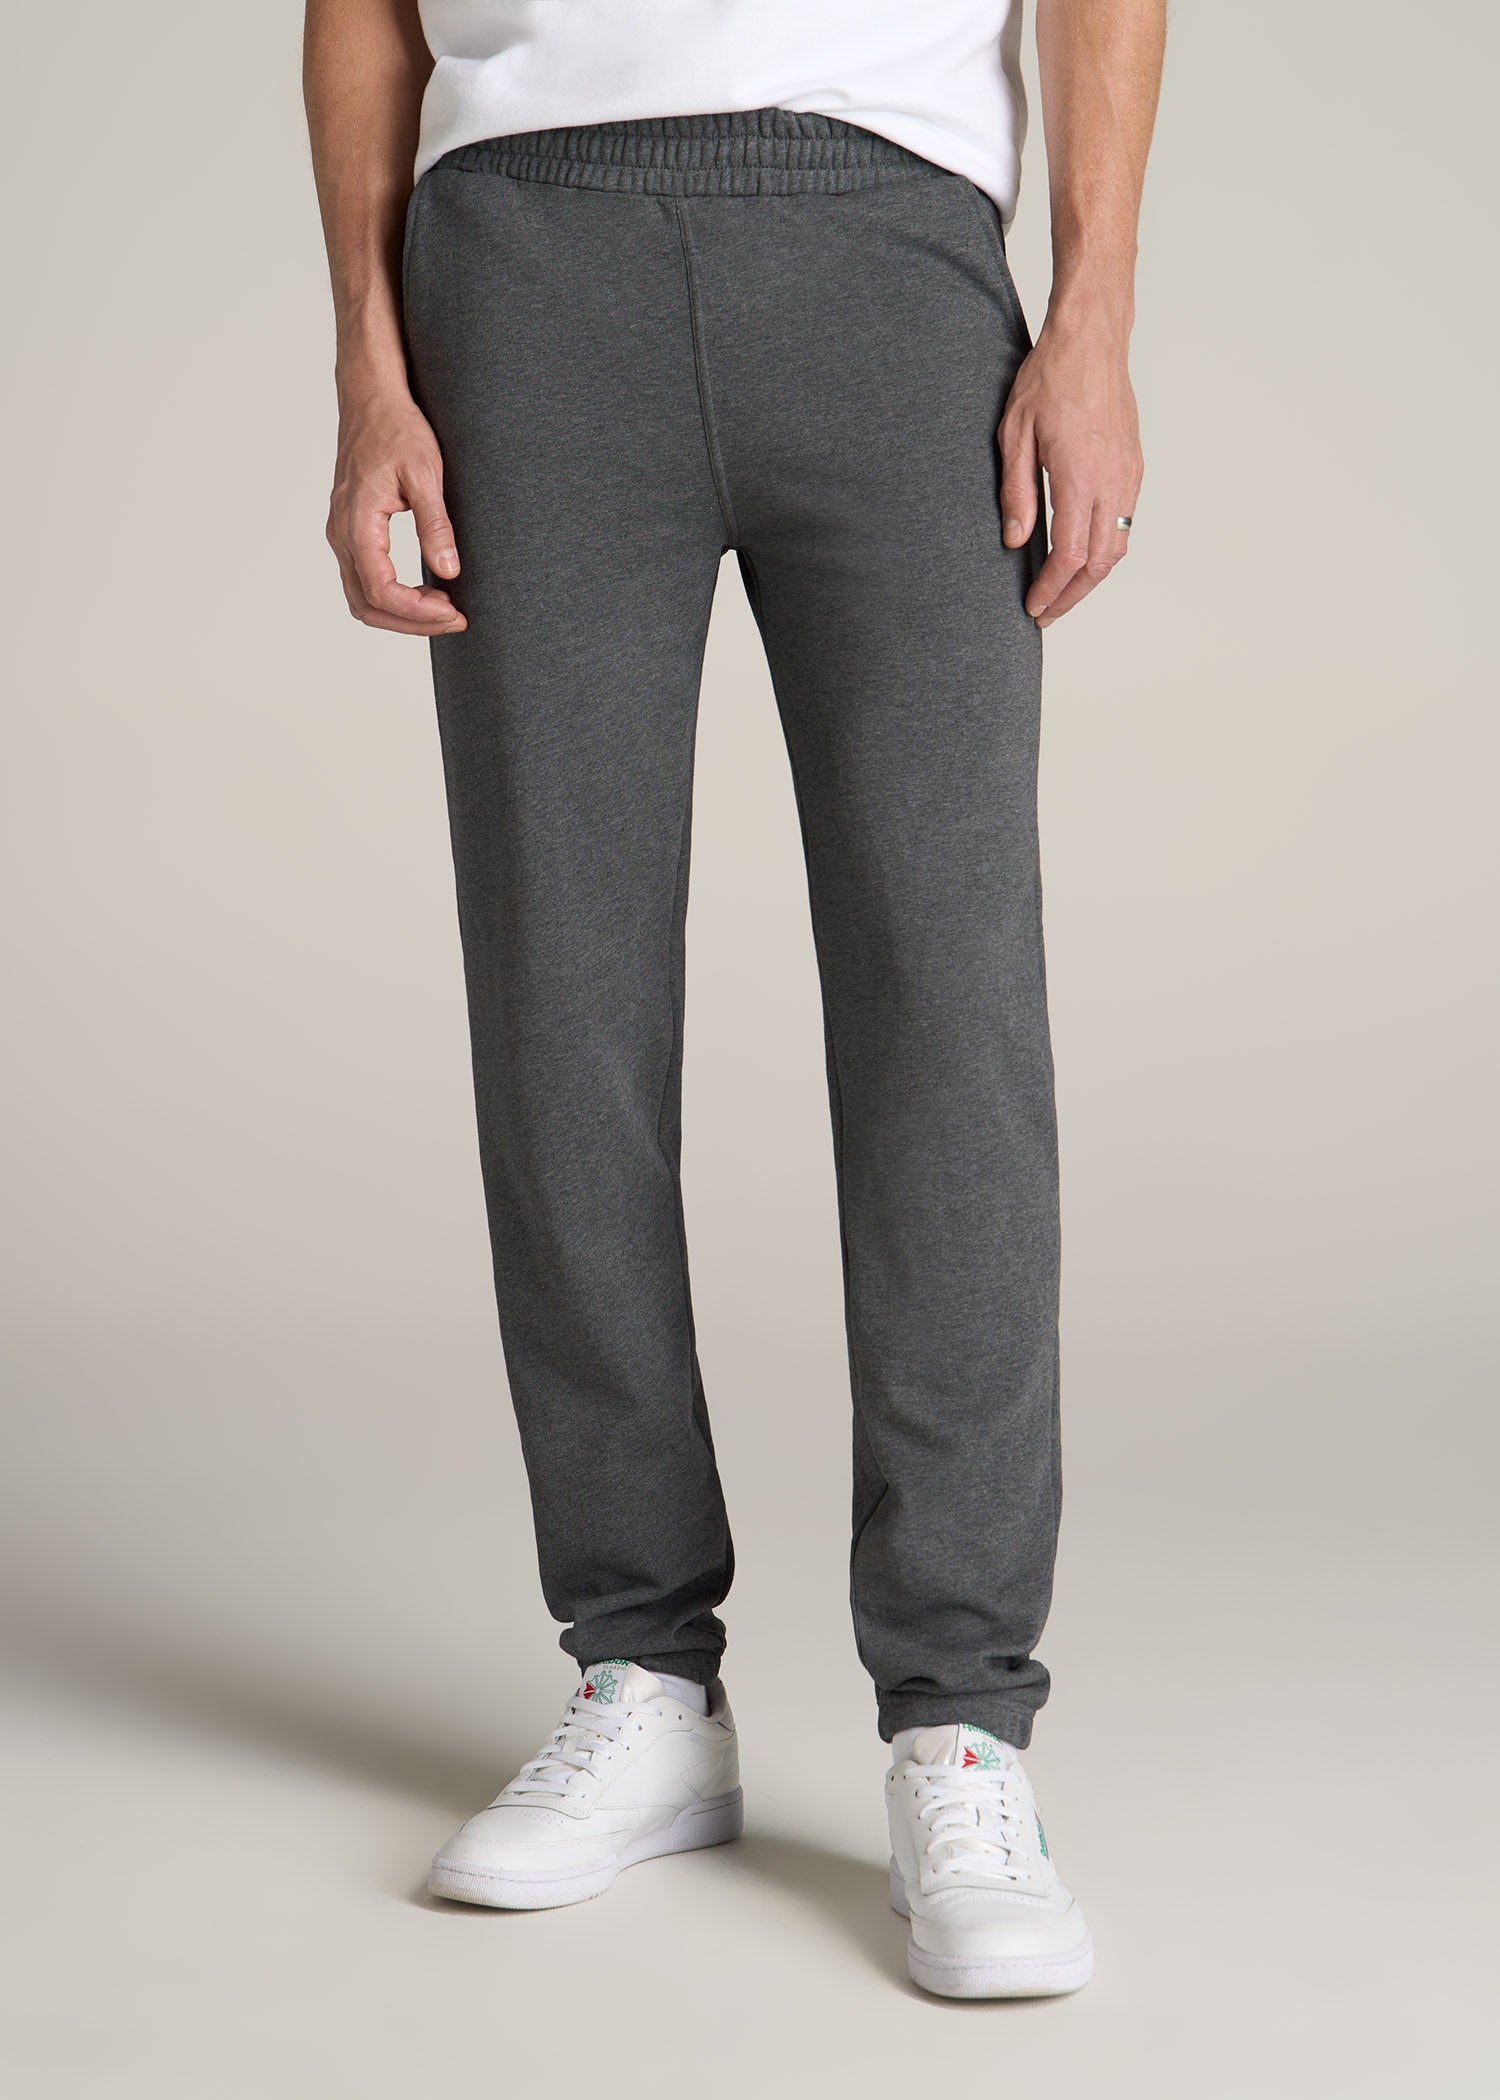 Men's Tall French Terry Sweatpants Charcoal Mix | American Tall